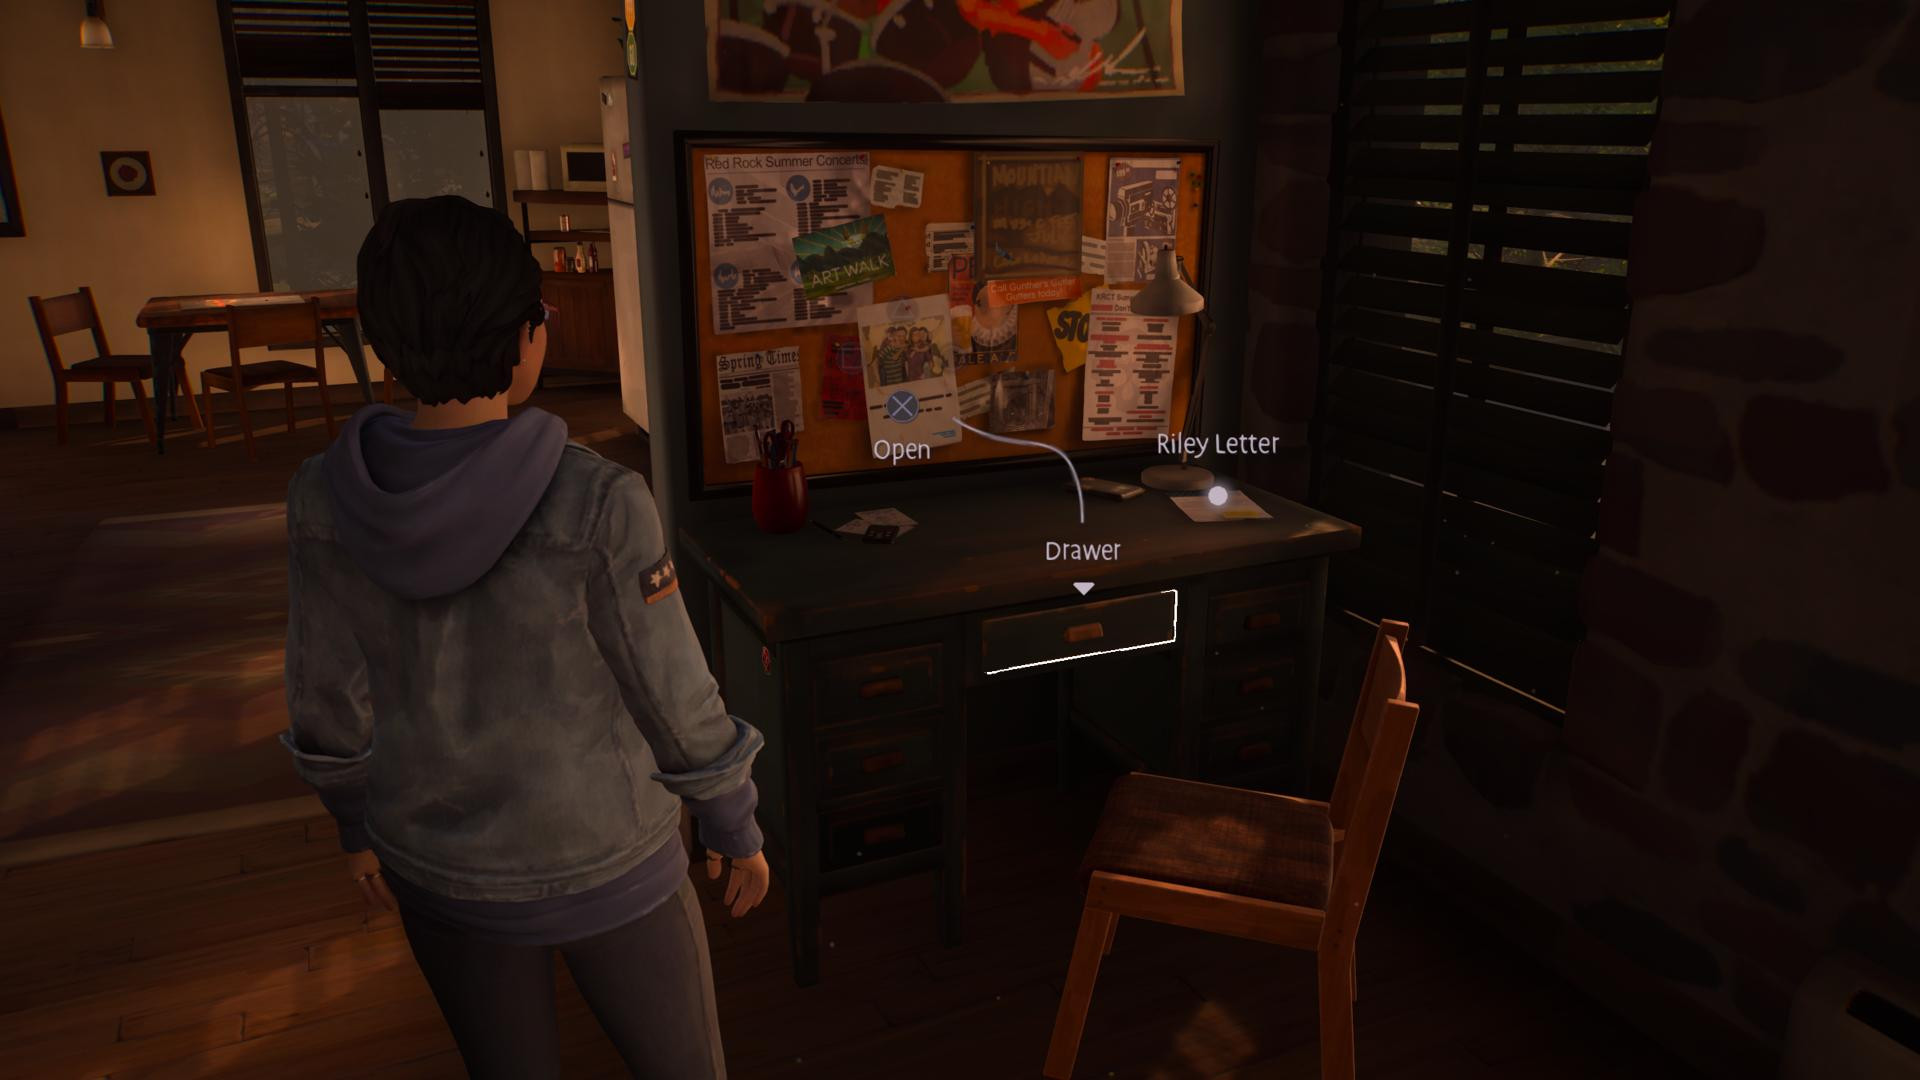 Life is Strange: True Colors - Chapter 4 - All Collectibles & Trophies 🏆  Trophy/Achievement Guide 